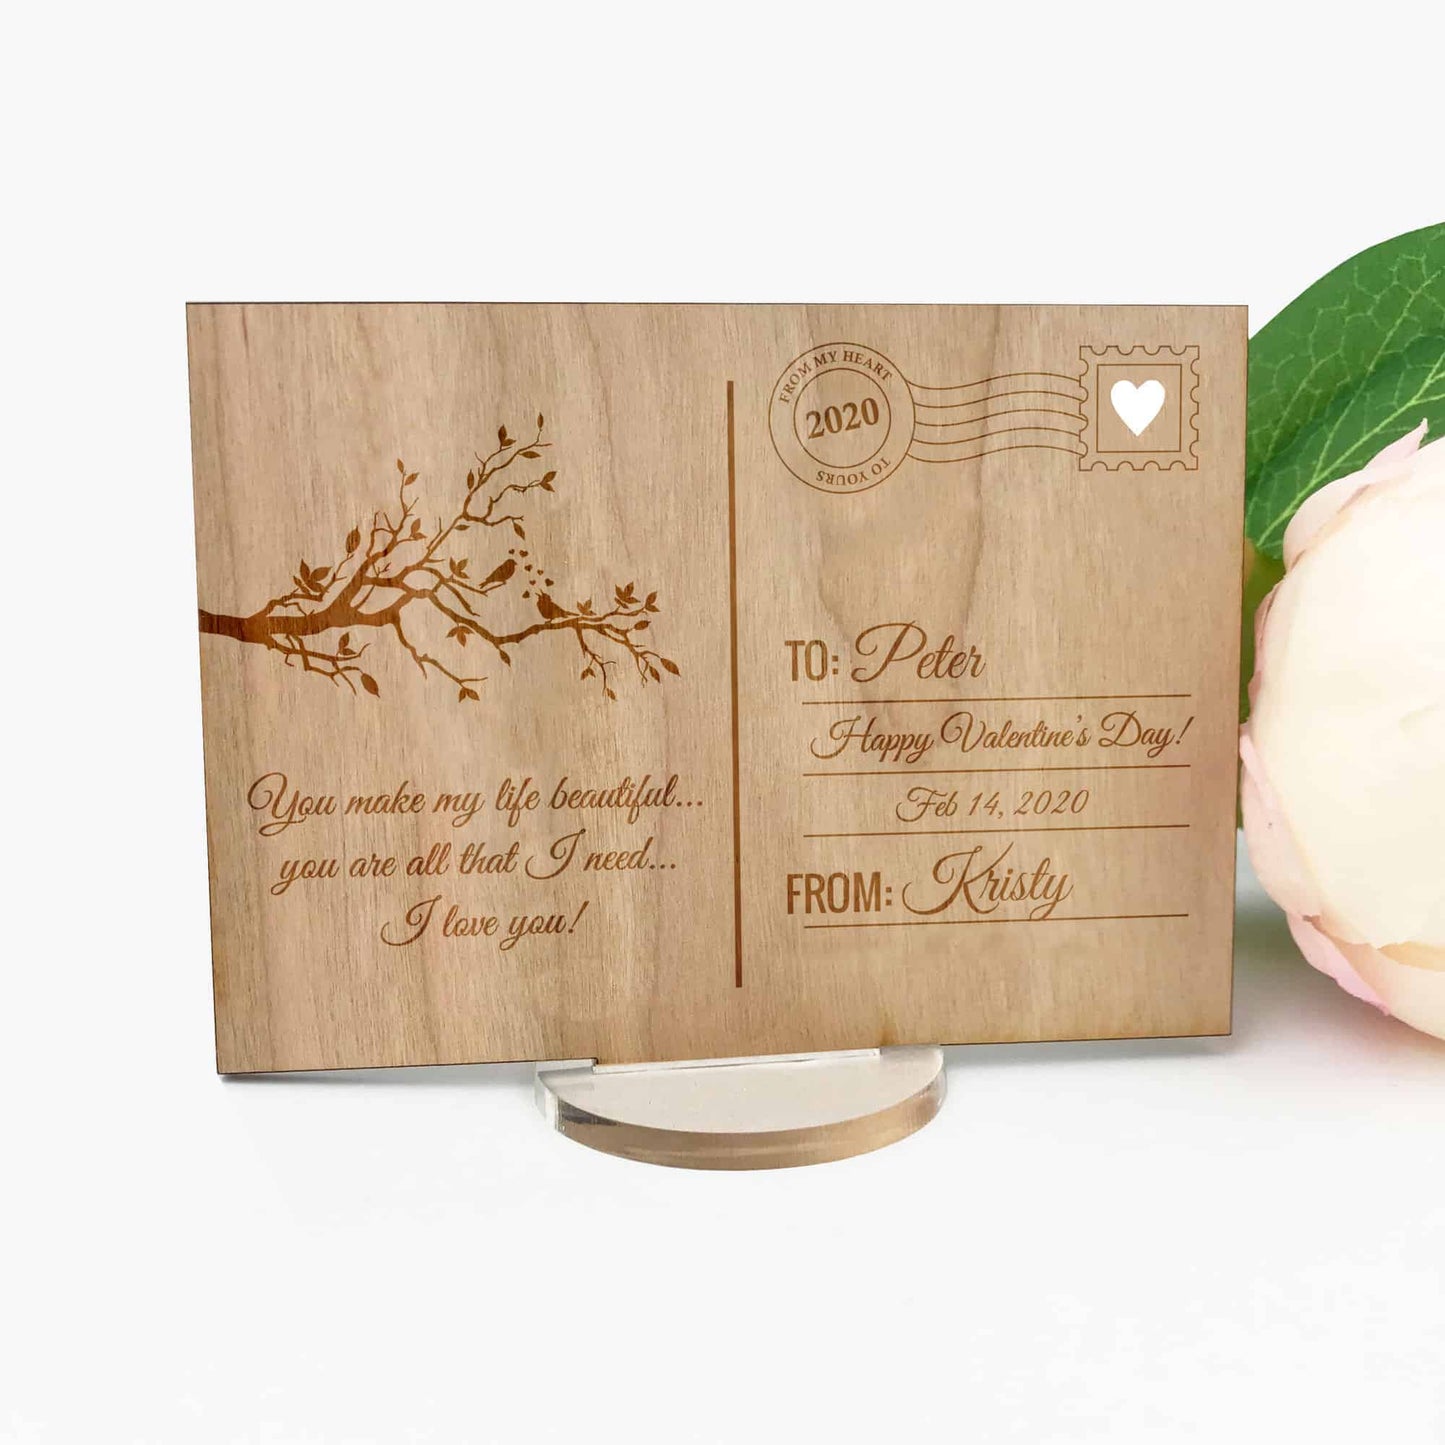 Wooden Engraved Valentines Day Message post card with stand